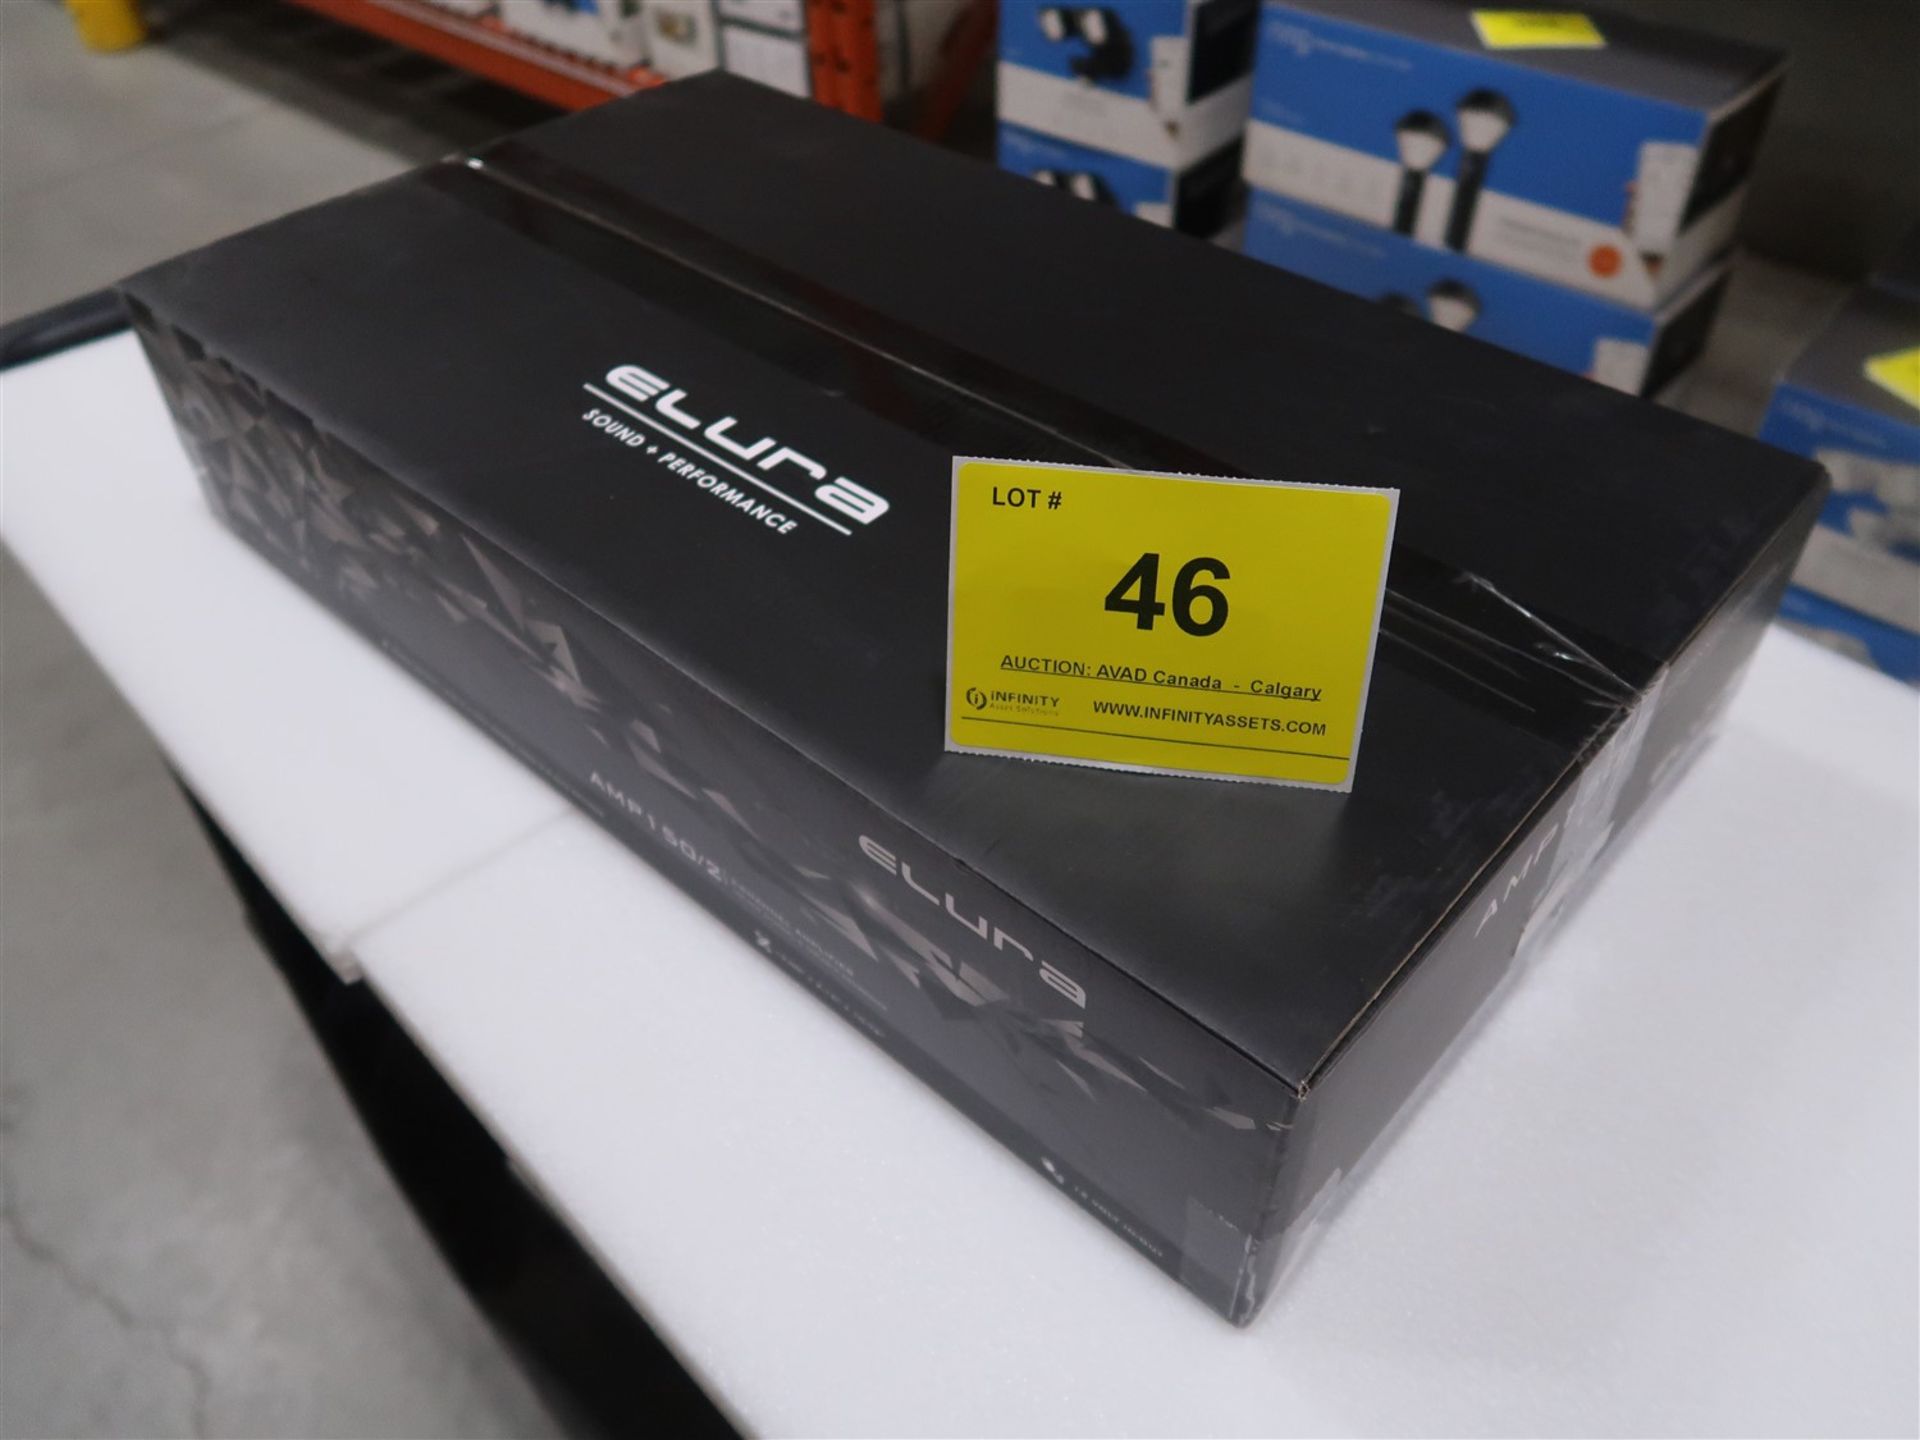 ELURA 2-CHANNEL AMPLIFIER, MOD. AMP150/2, 150W PER CHANNEL AND VARIABLE CROSSOVER, (BNIB) MSRP $720